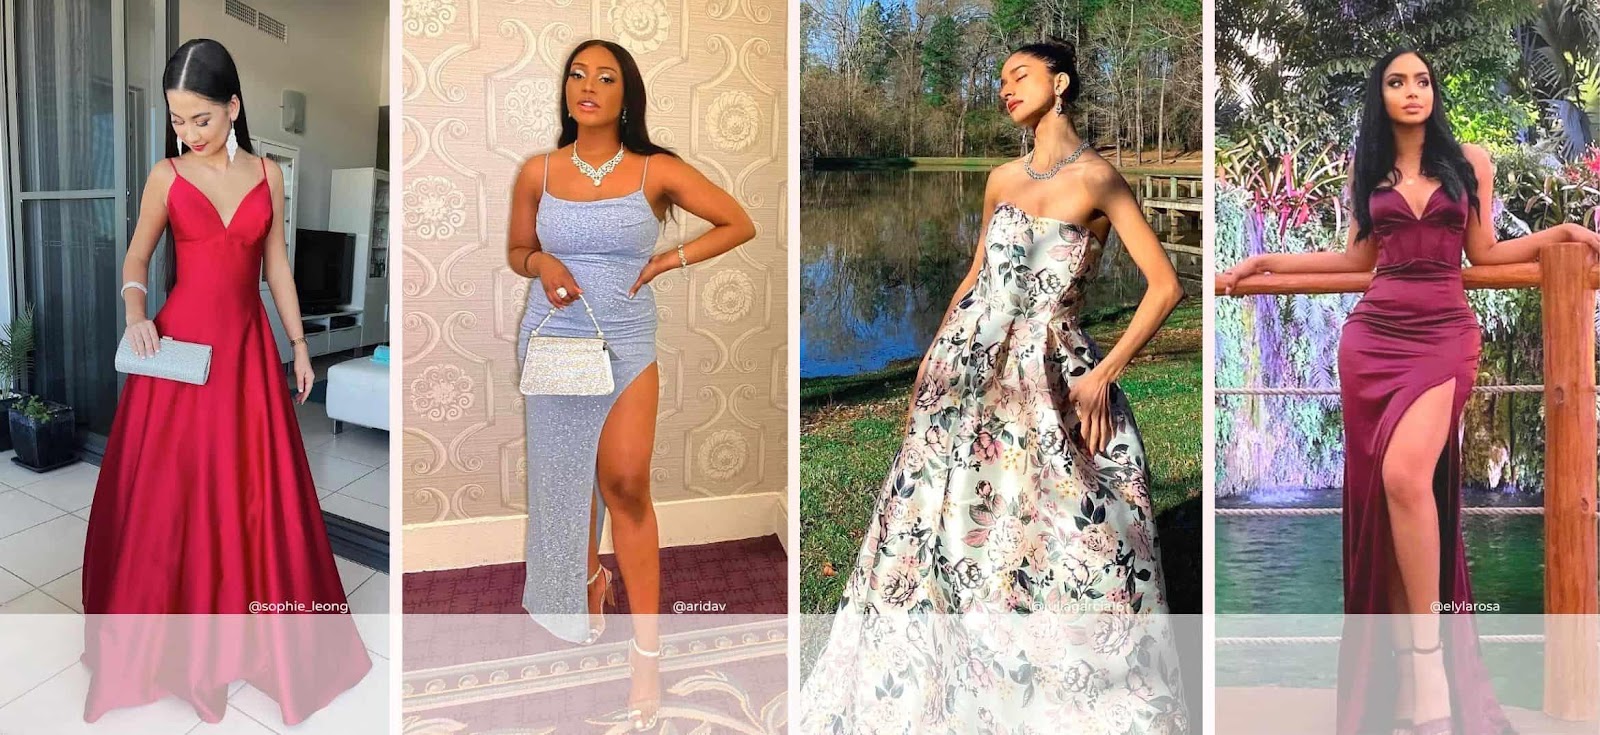 What to Wear to Prom: Looks to Inspire a Picture-Perfect Outfit | Windsor